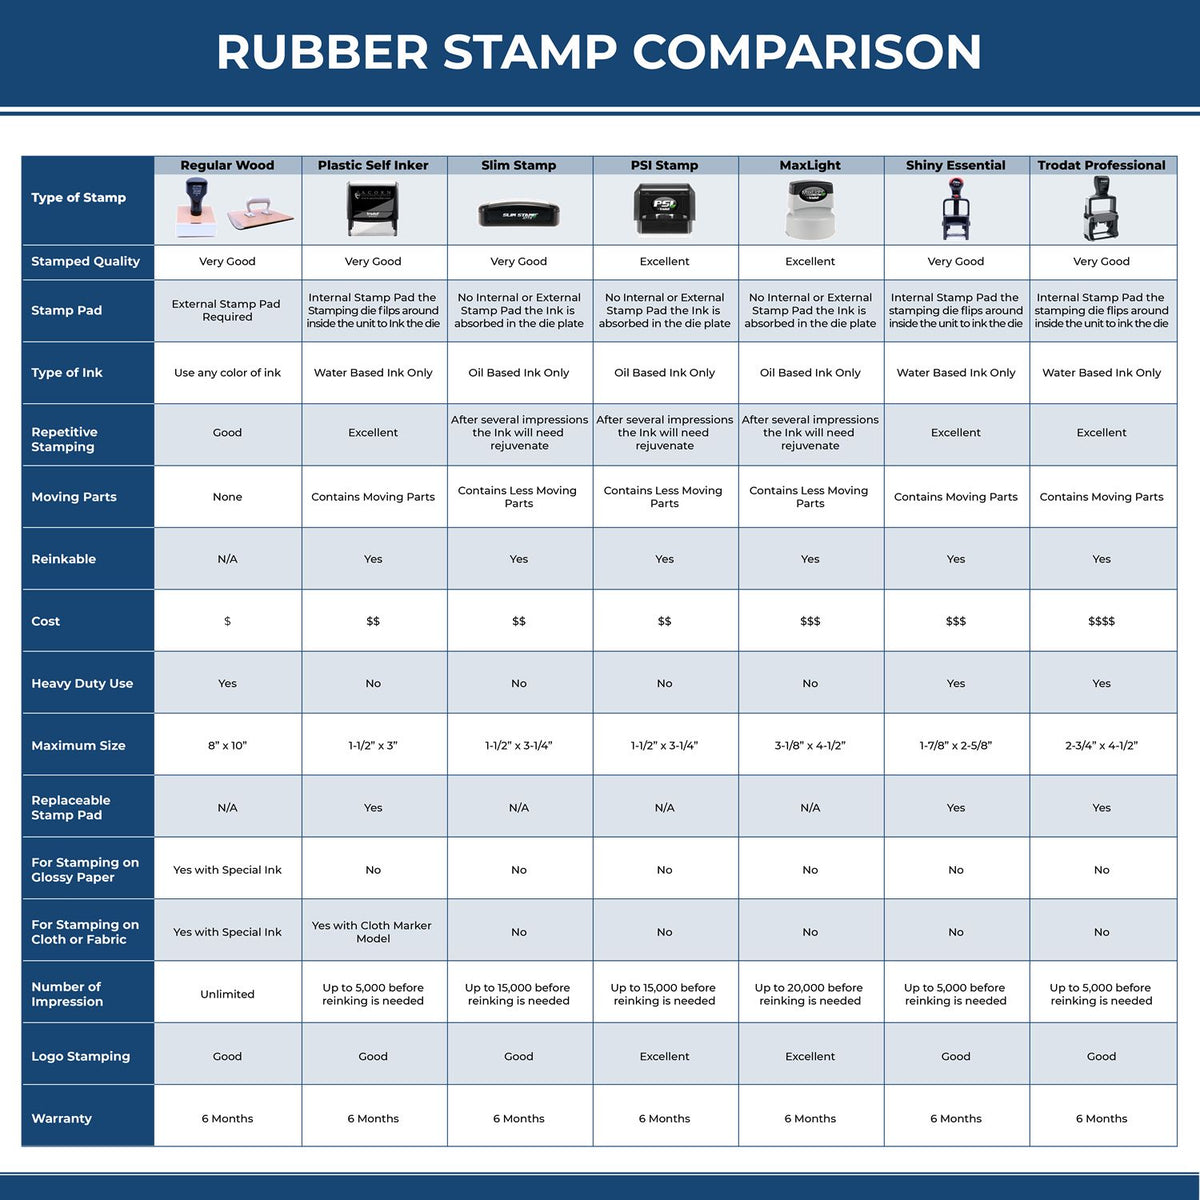 Large Self-Inking Temporarily Away Stamp 5582S Rubber Stamp Comparison